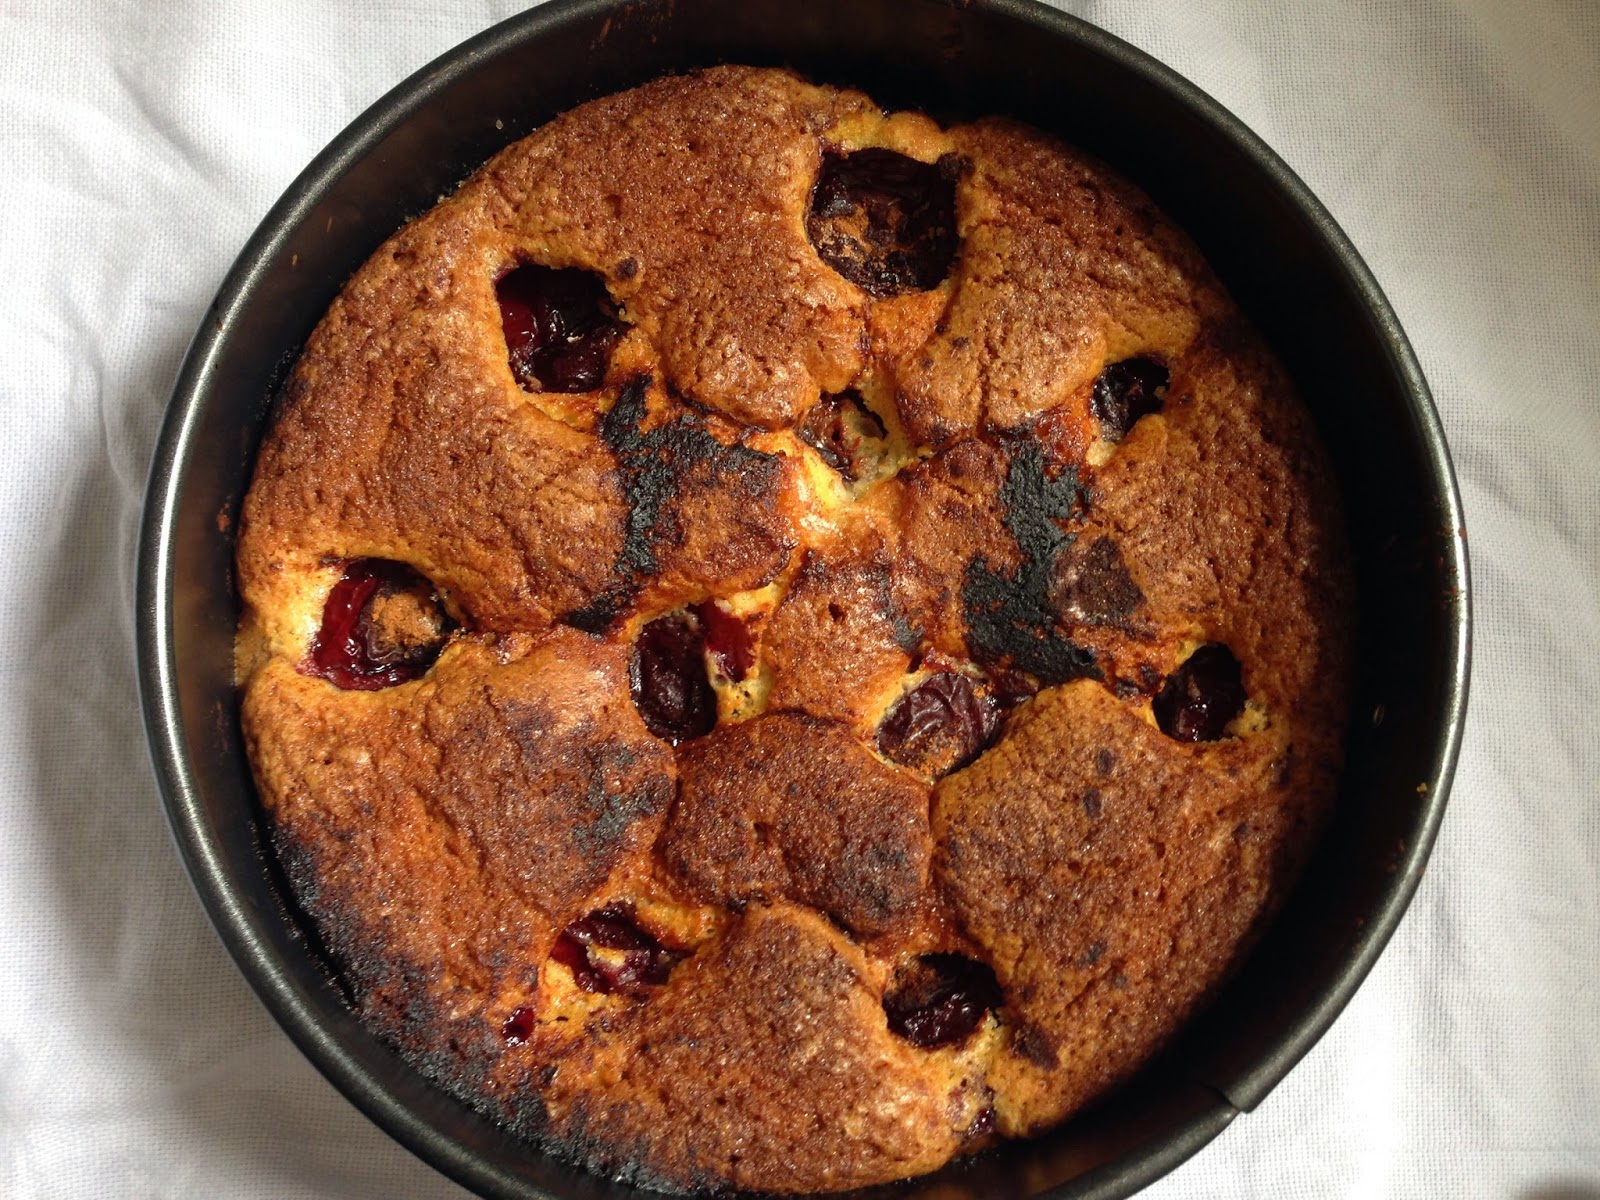 plum torte from the NYTimes by Marian Burros